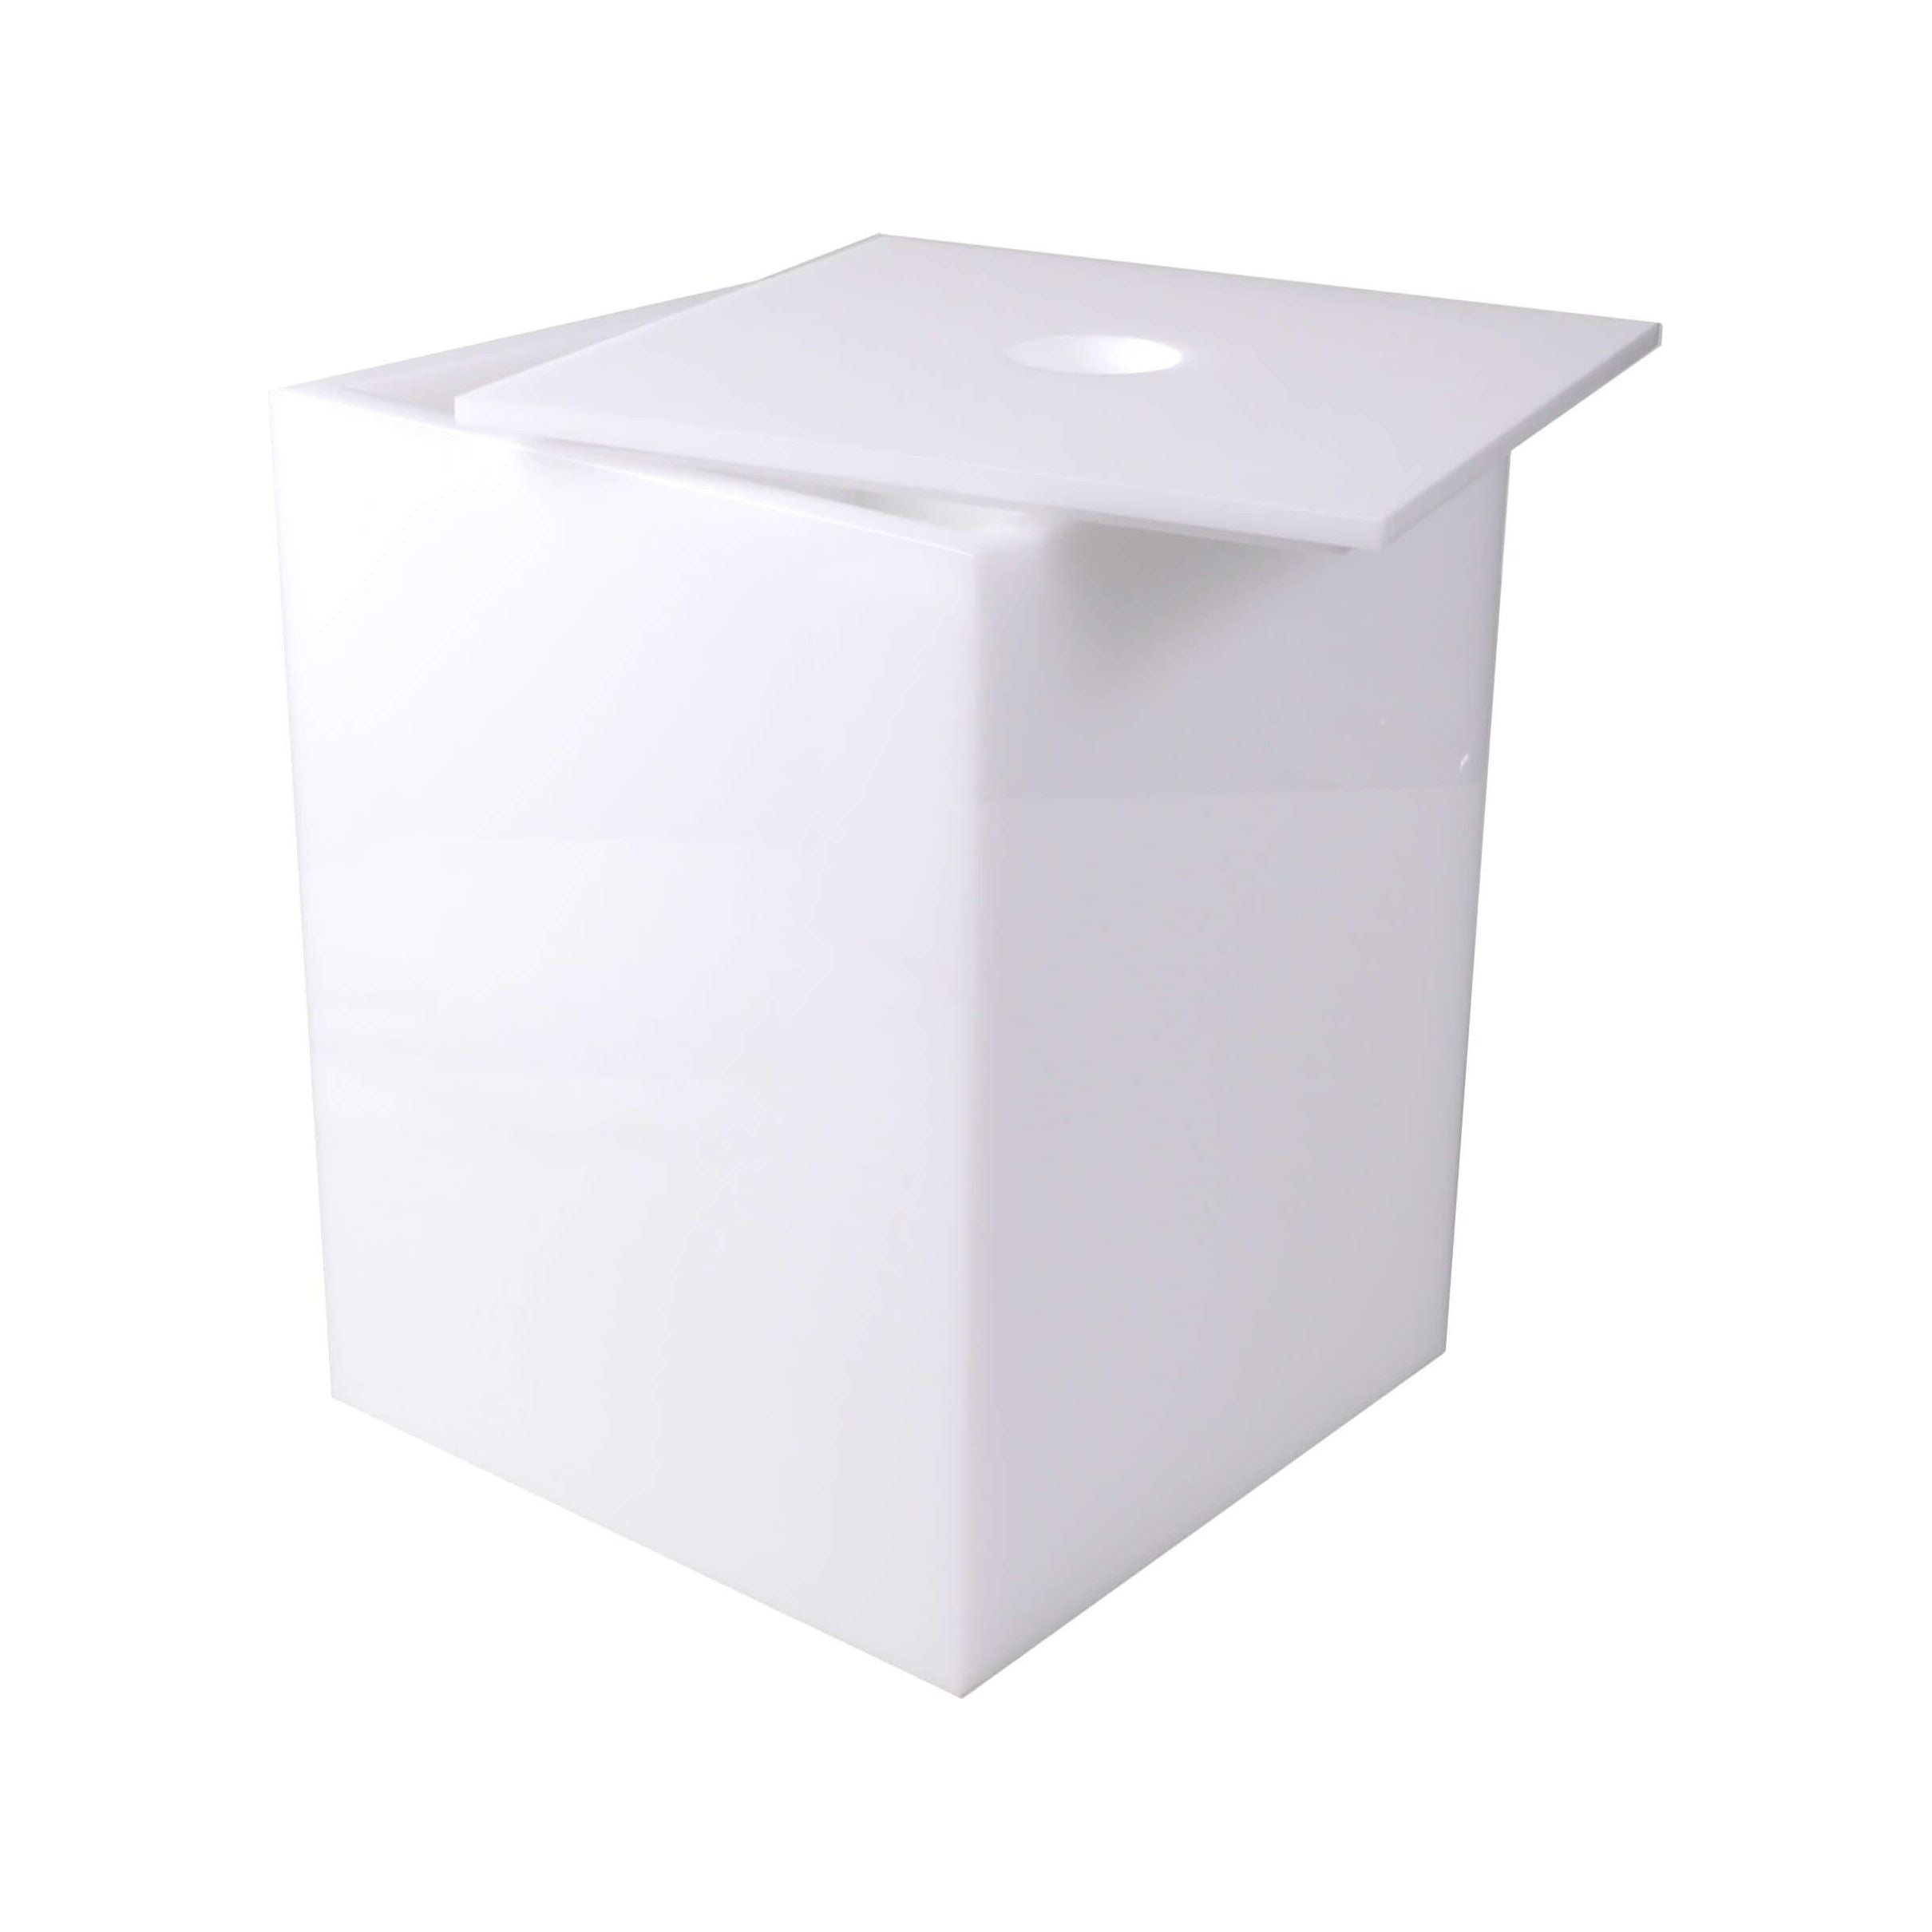 Mike + Ally - Ice White Square Basket with Lid - 31664 - White - 